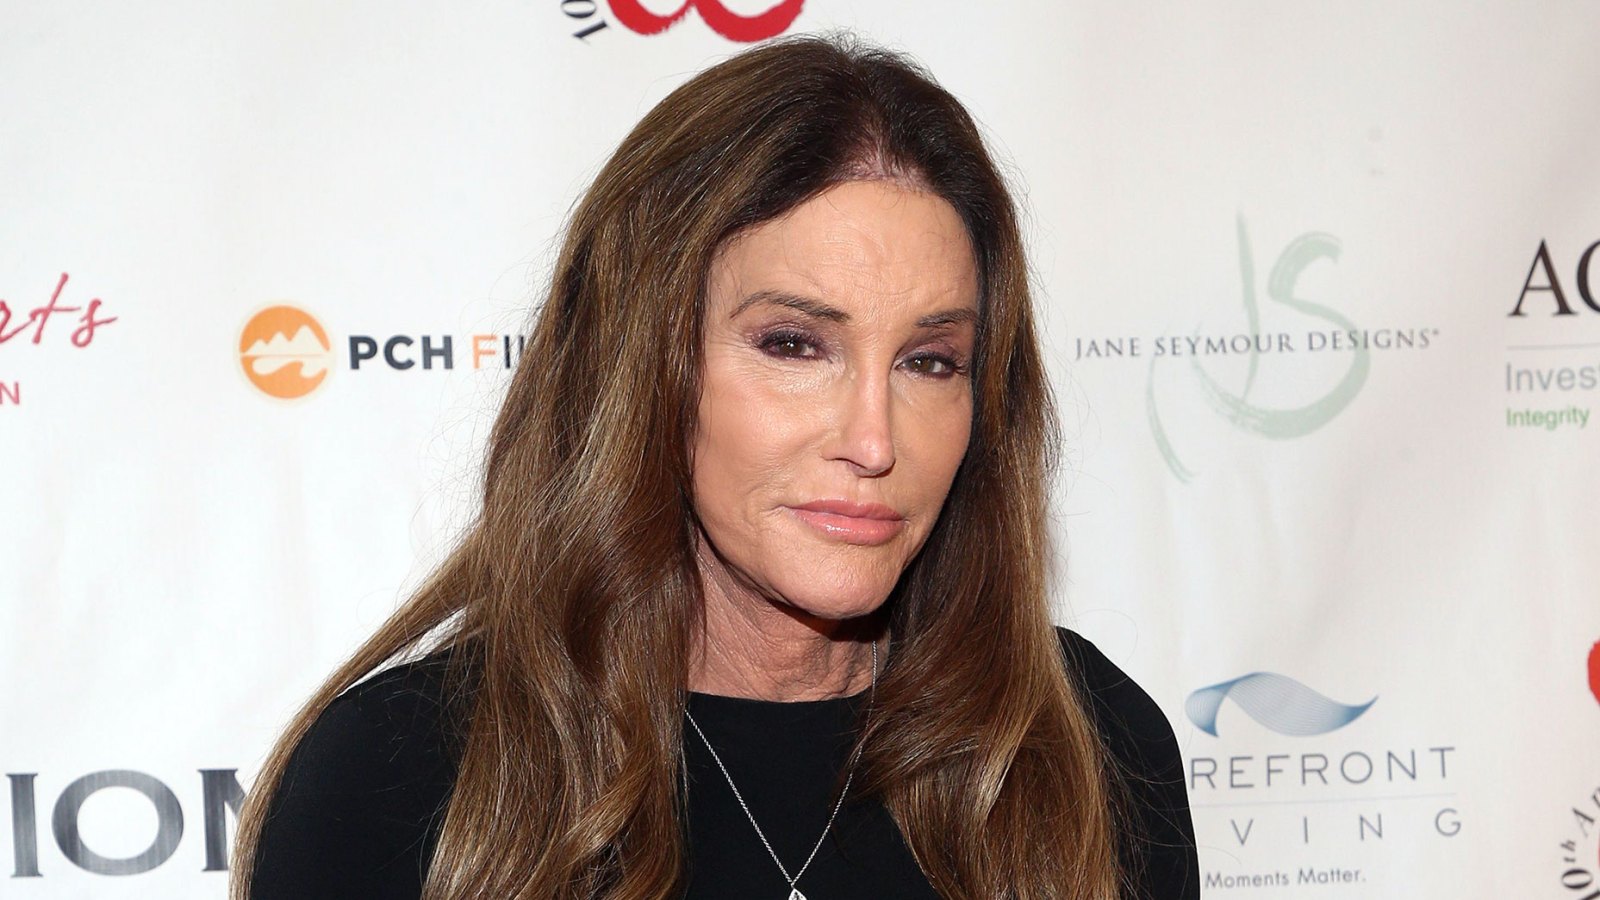 Caitlyn Jenner Slams Beverly Hills Hotel for Denying Her Service Because of a Tiny Rip in Her Jeans